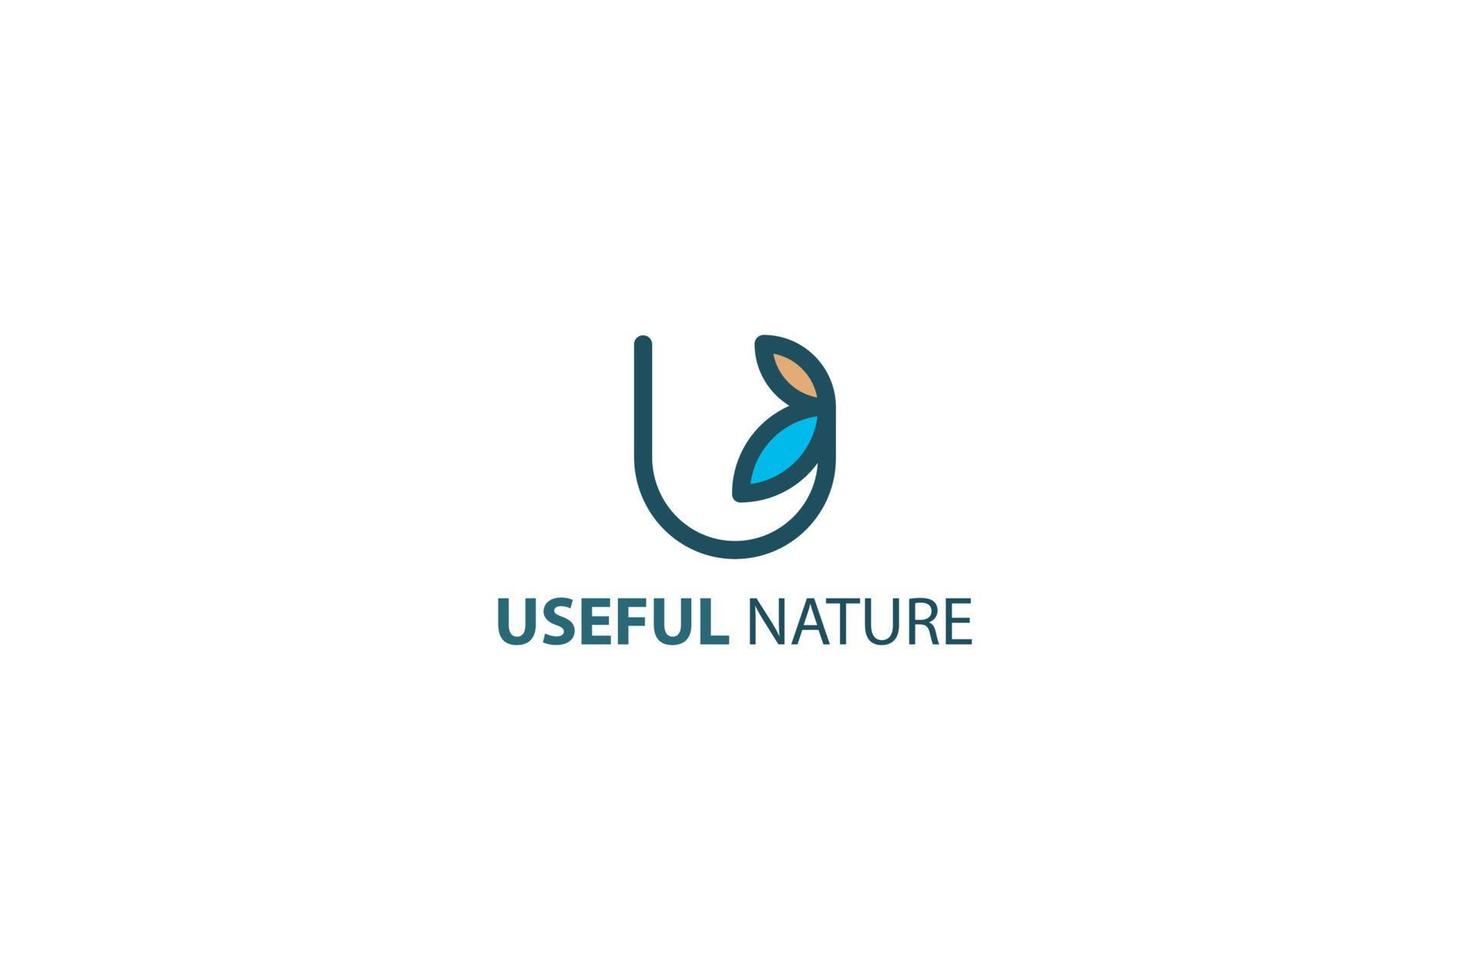 Letter U simple and line art creative natural business logo vector